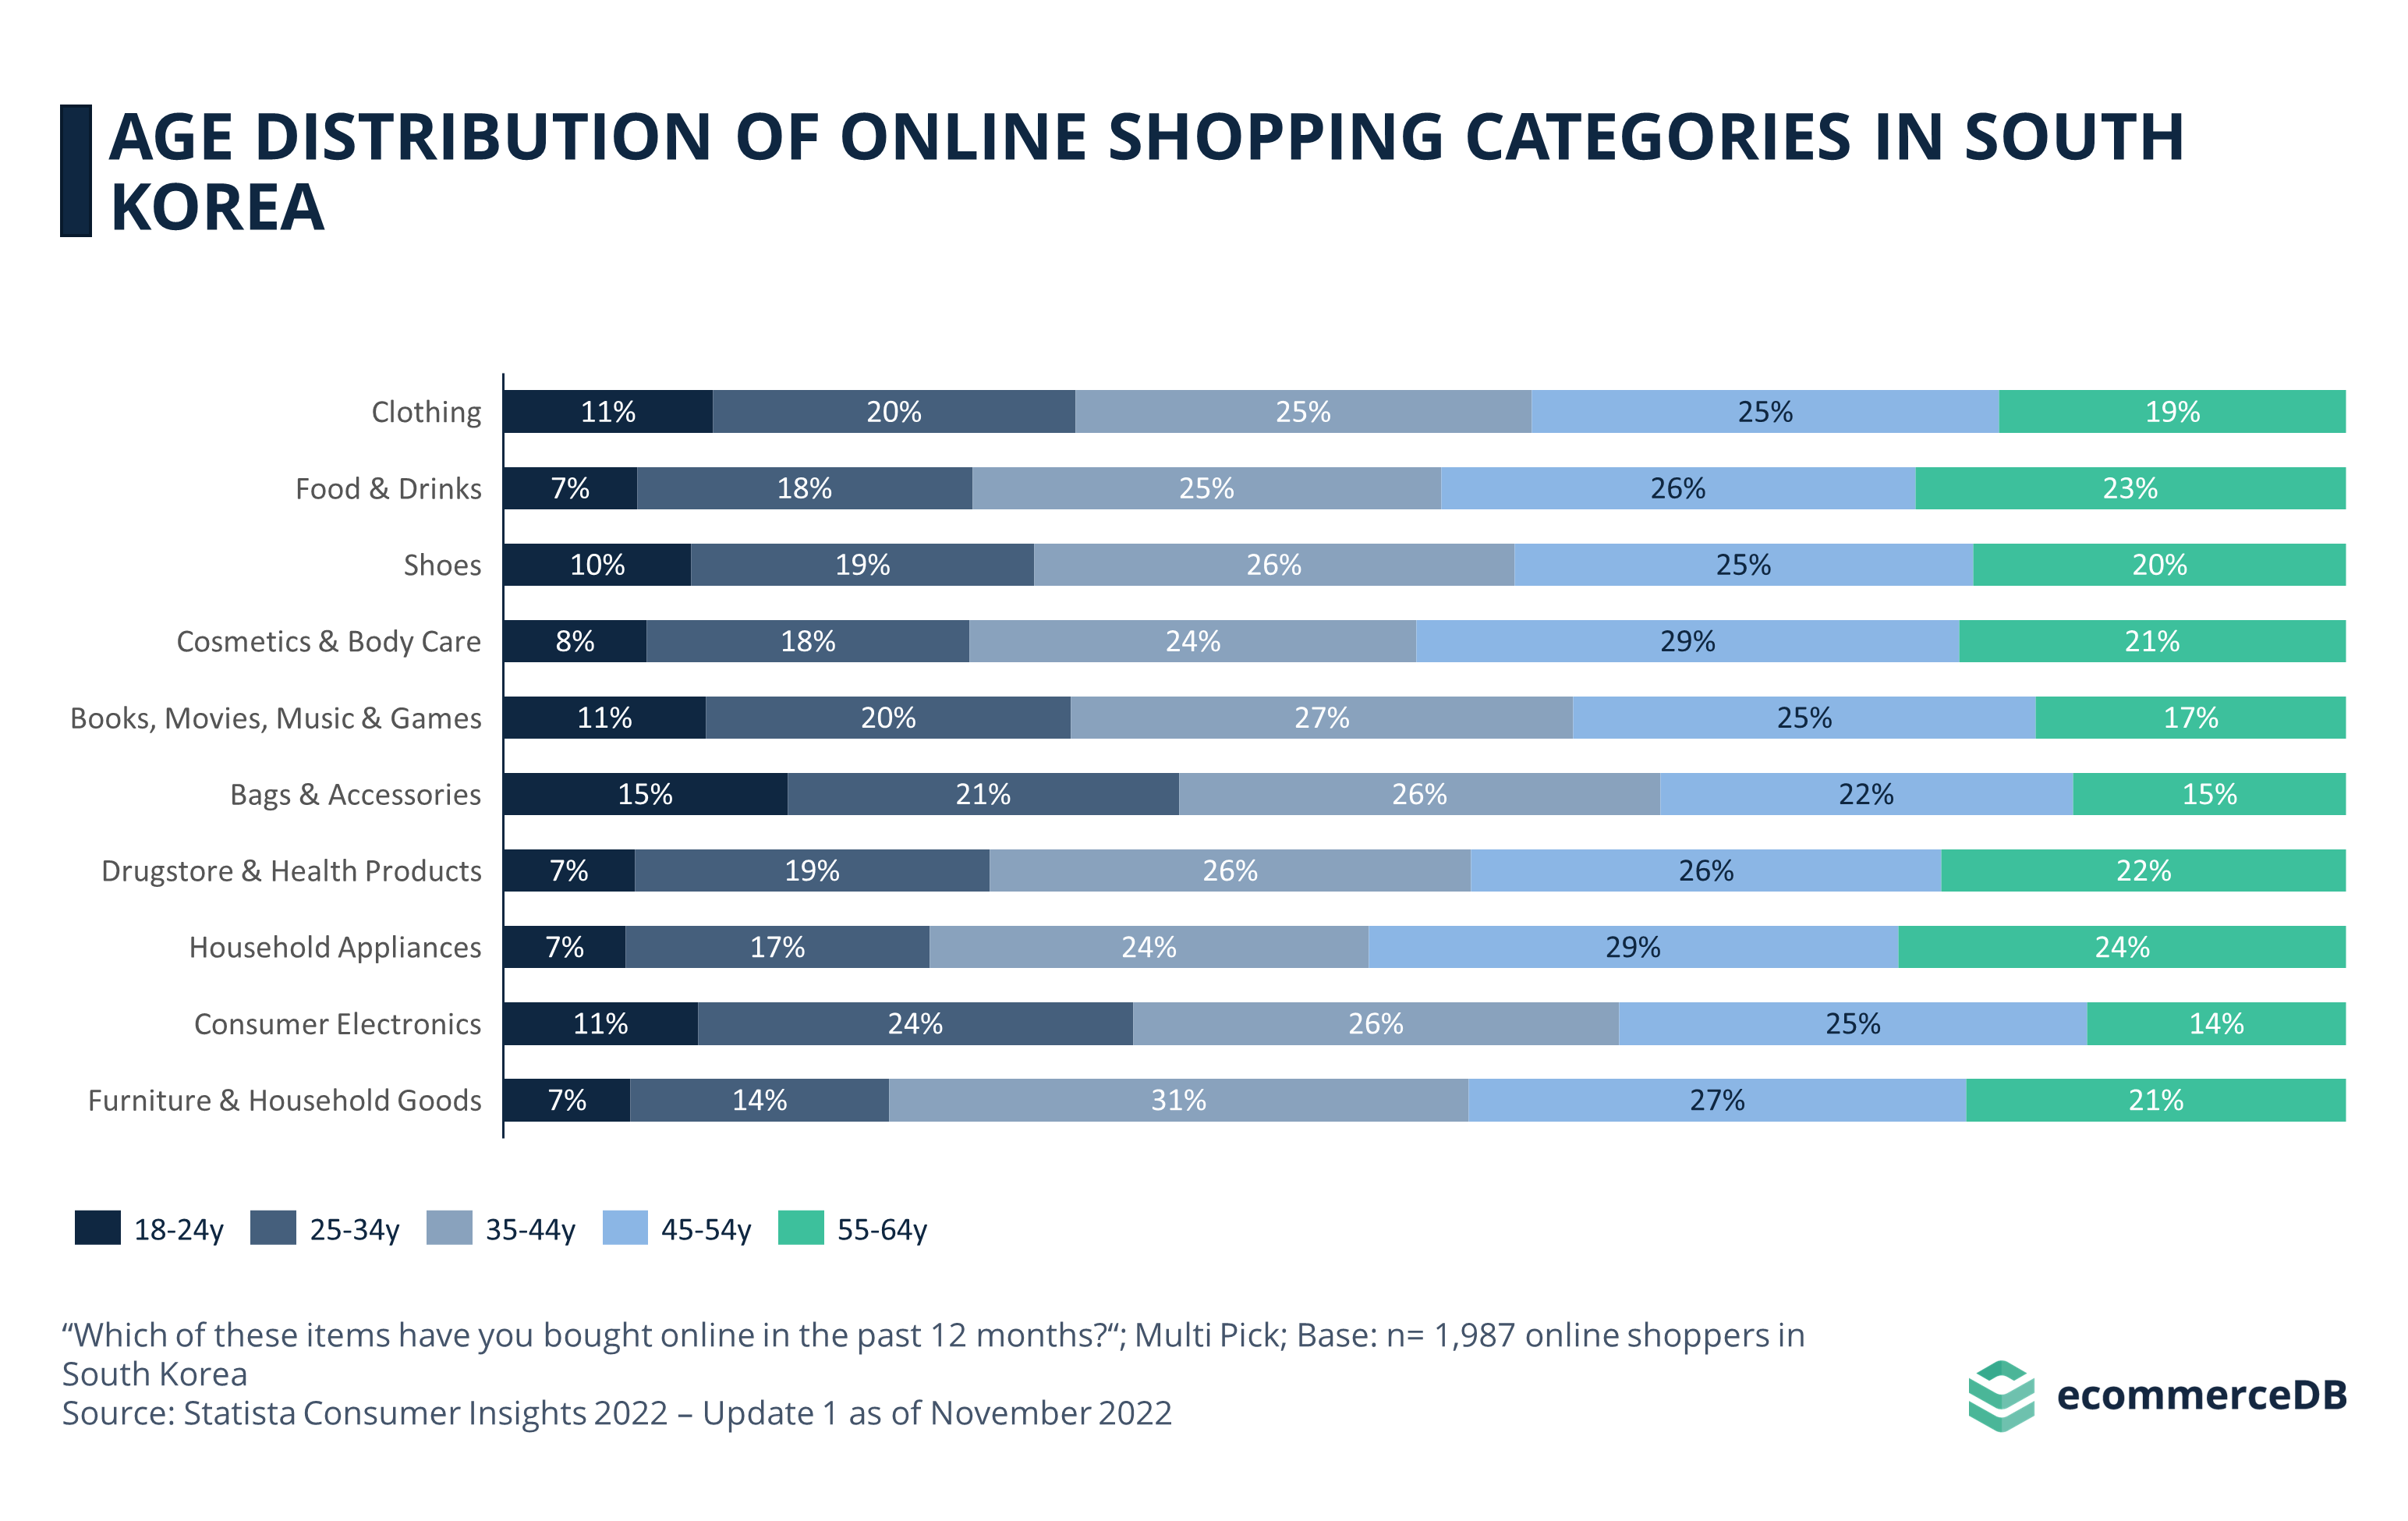 AGE DISTRIBUTION OF ONLINE SHOPPING CATEGORIES IN SOUTH KOREA